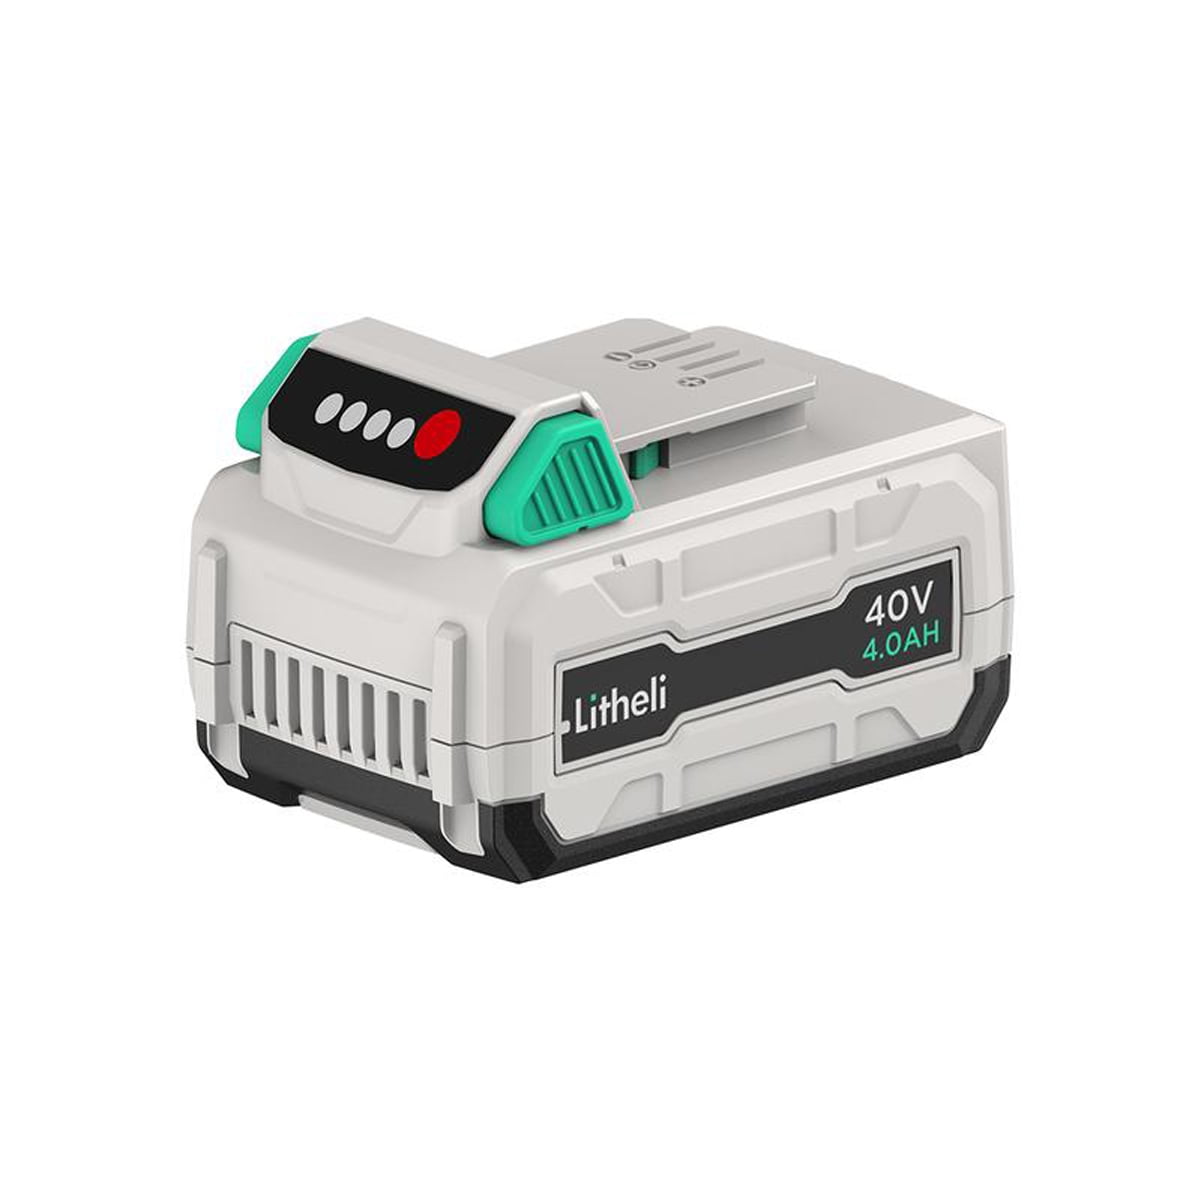 40V MAX Lithium-Ion 2.0Ah Battery Pack